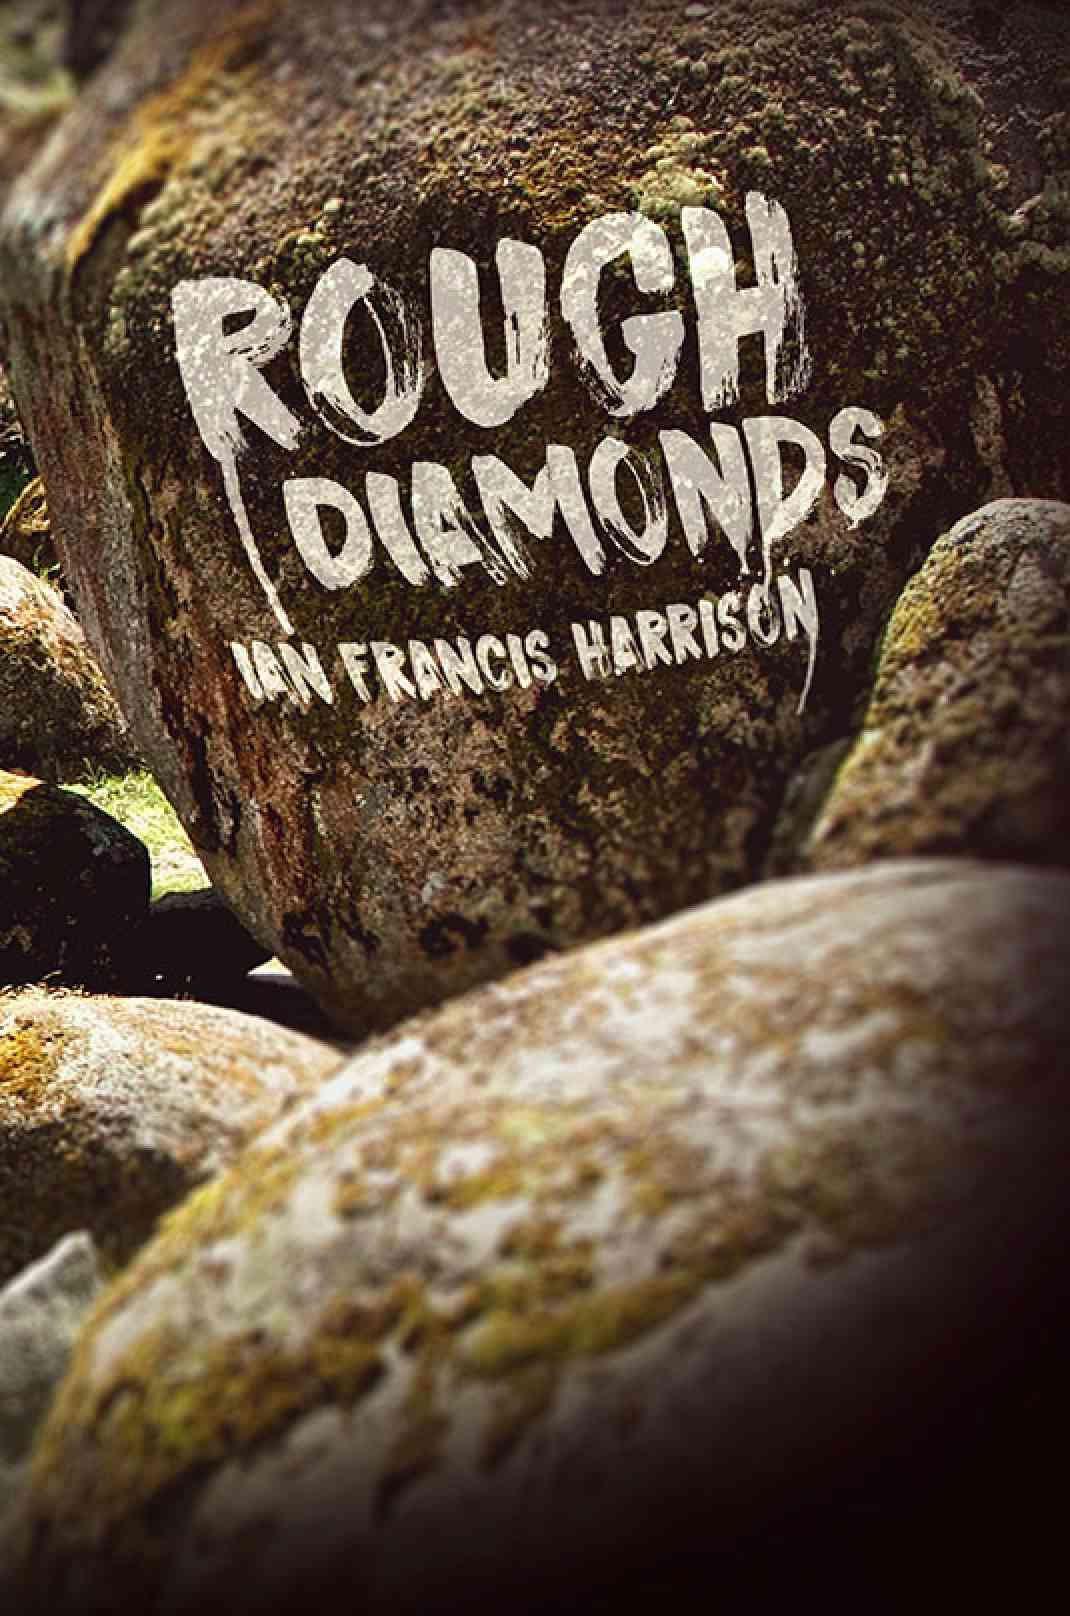 Rough Diamonds is now available in book outlets